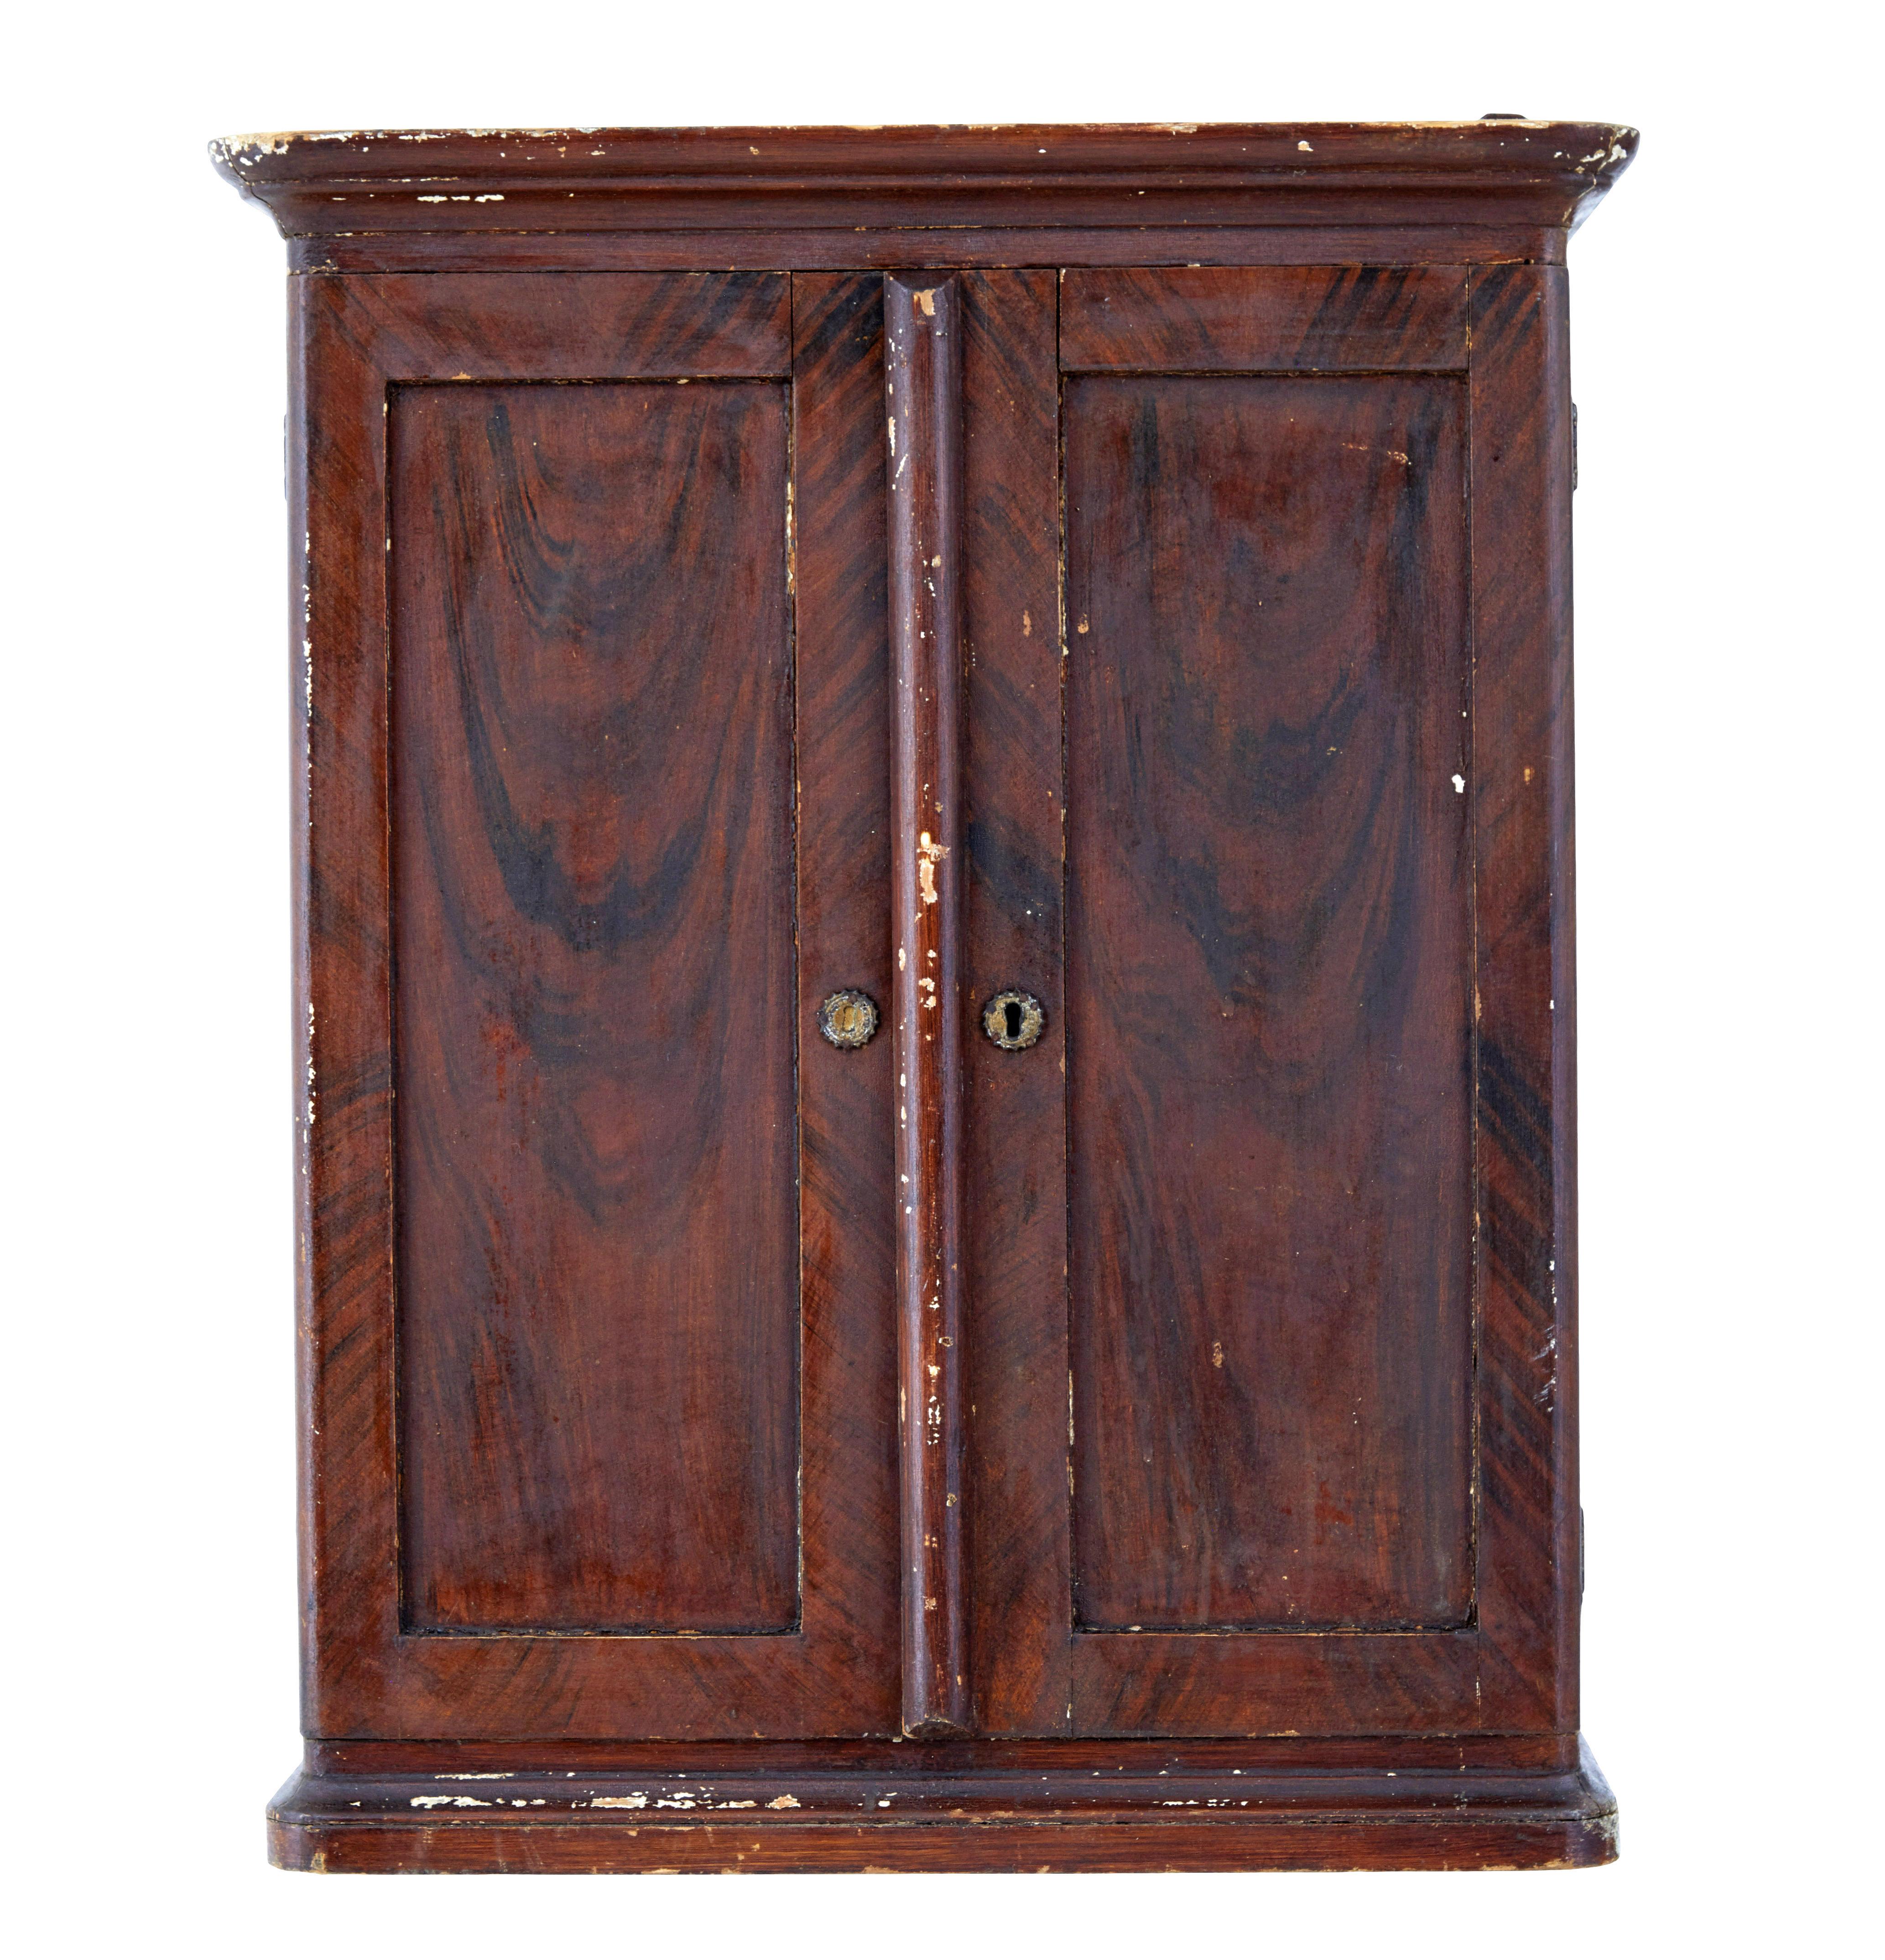 19th century Scandinavian painted wall cabinet circa 1870.

Large pine hand painted Swedish wall cabinet.  Made from pine and painted in a deep plum colour scheme with a hand painted effect over the top to simulate grain and tone.

Double doors open